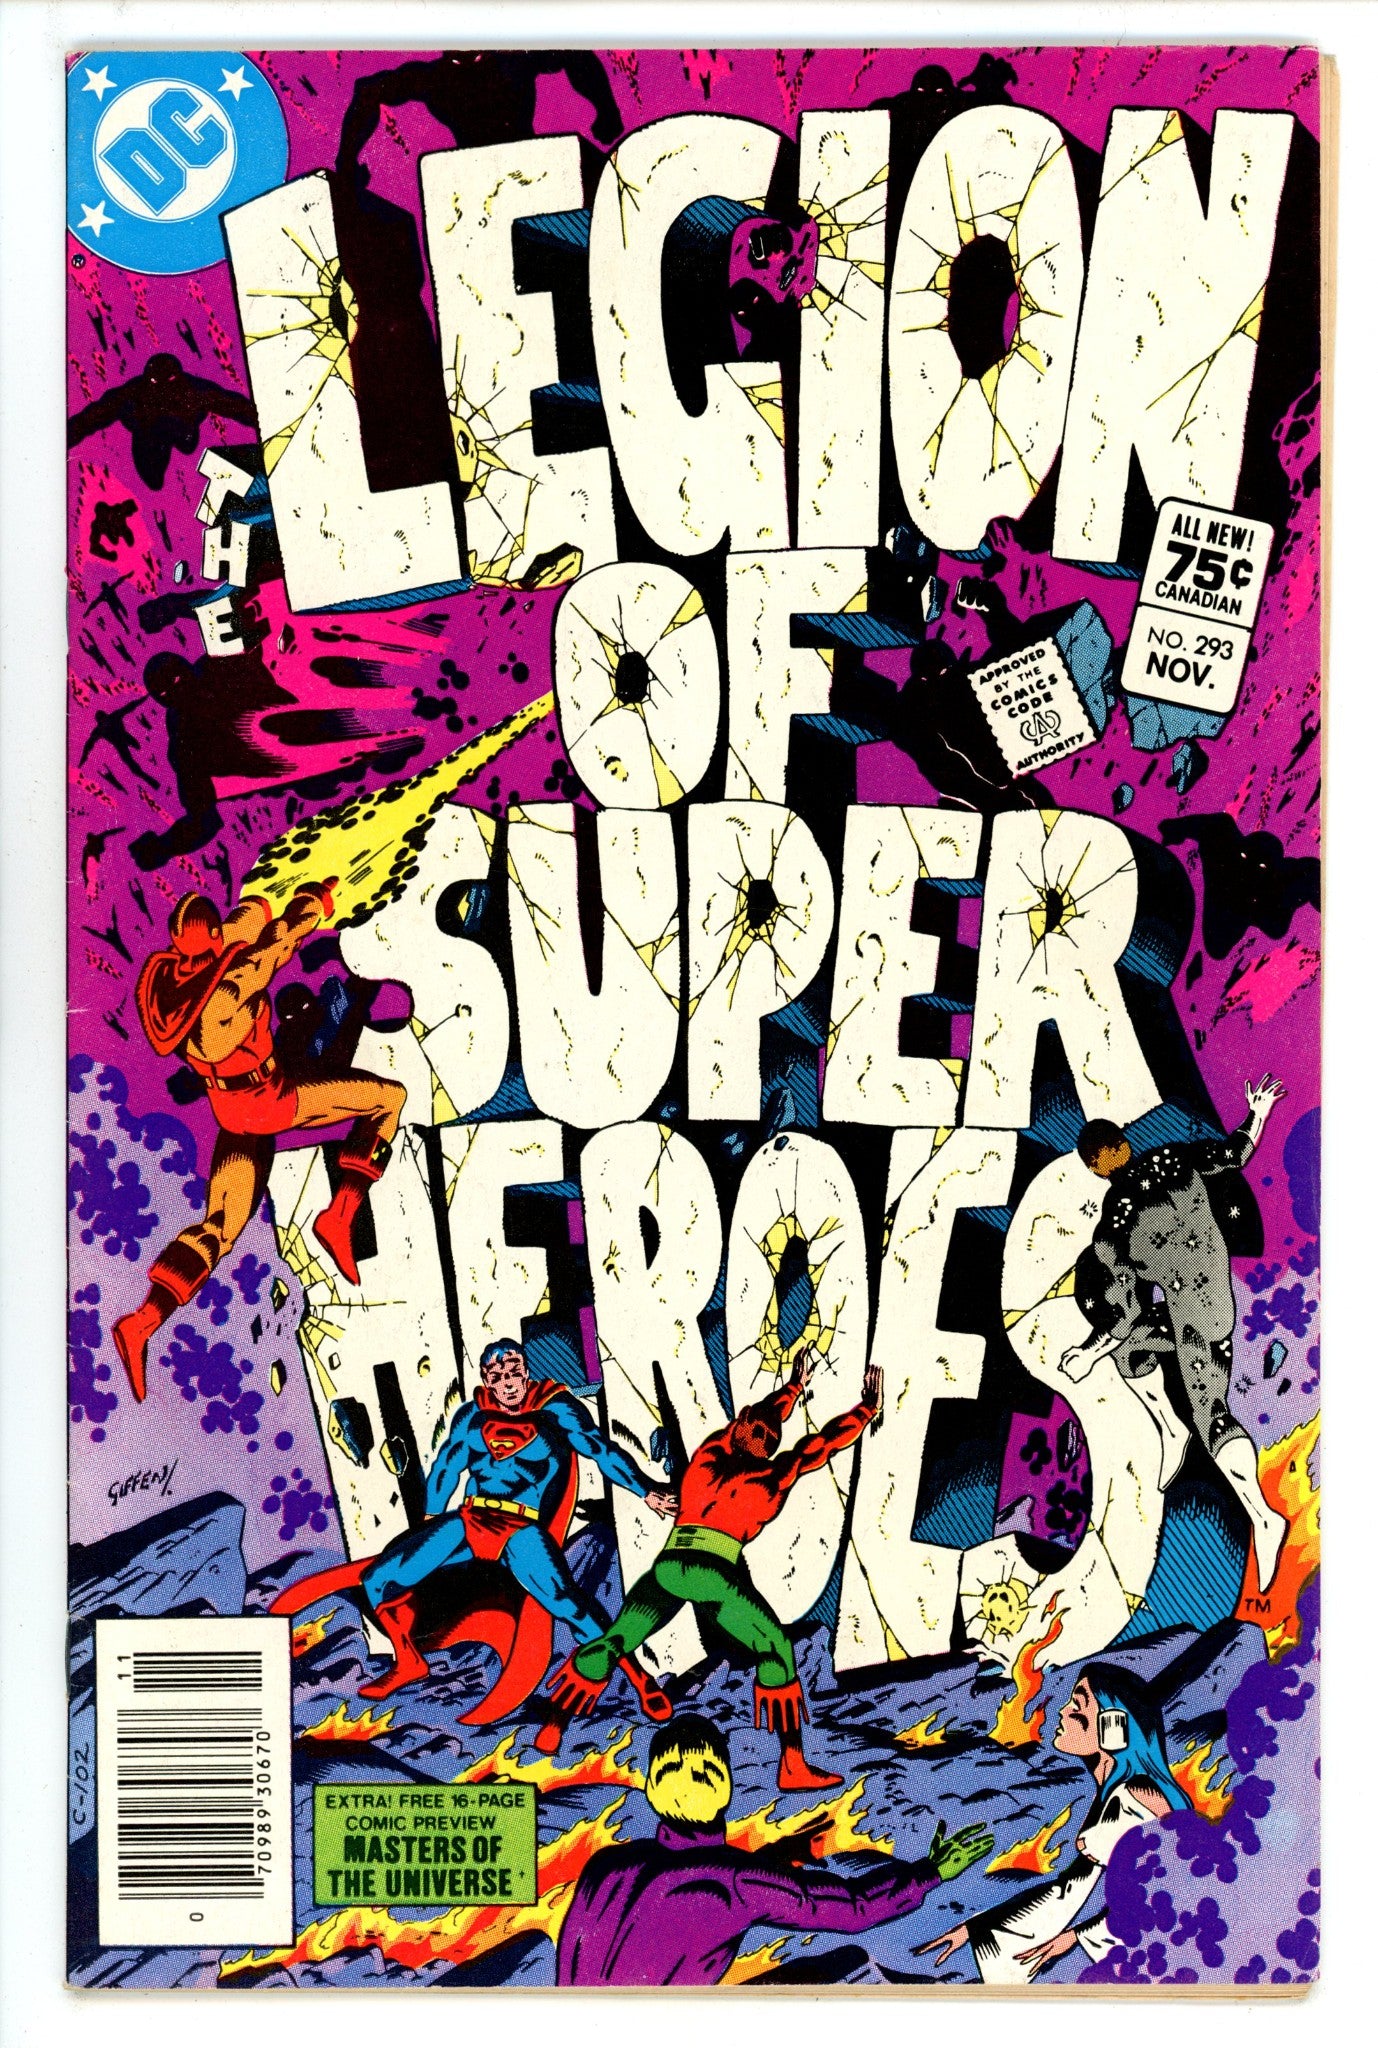 The Legion of Super-Heroes Vol 2 293 FN/VF (7.0) (1982) Canadian Price Variant 